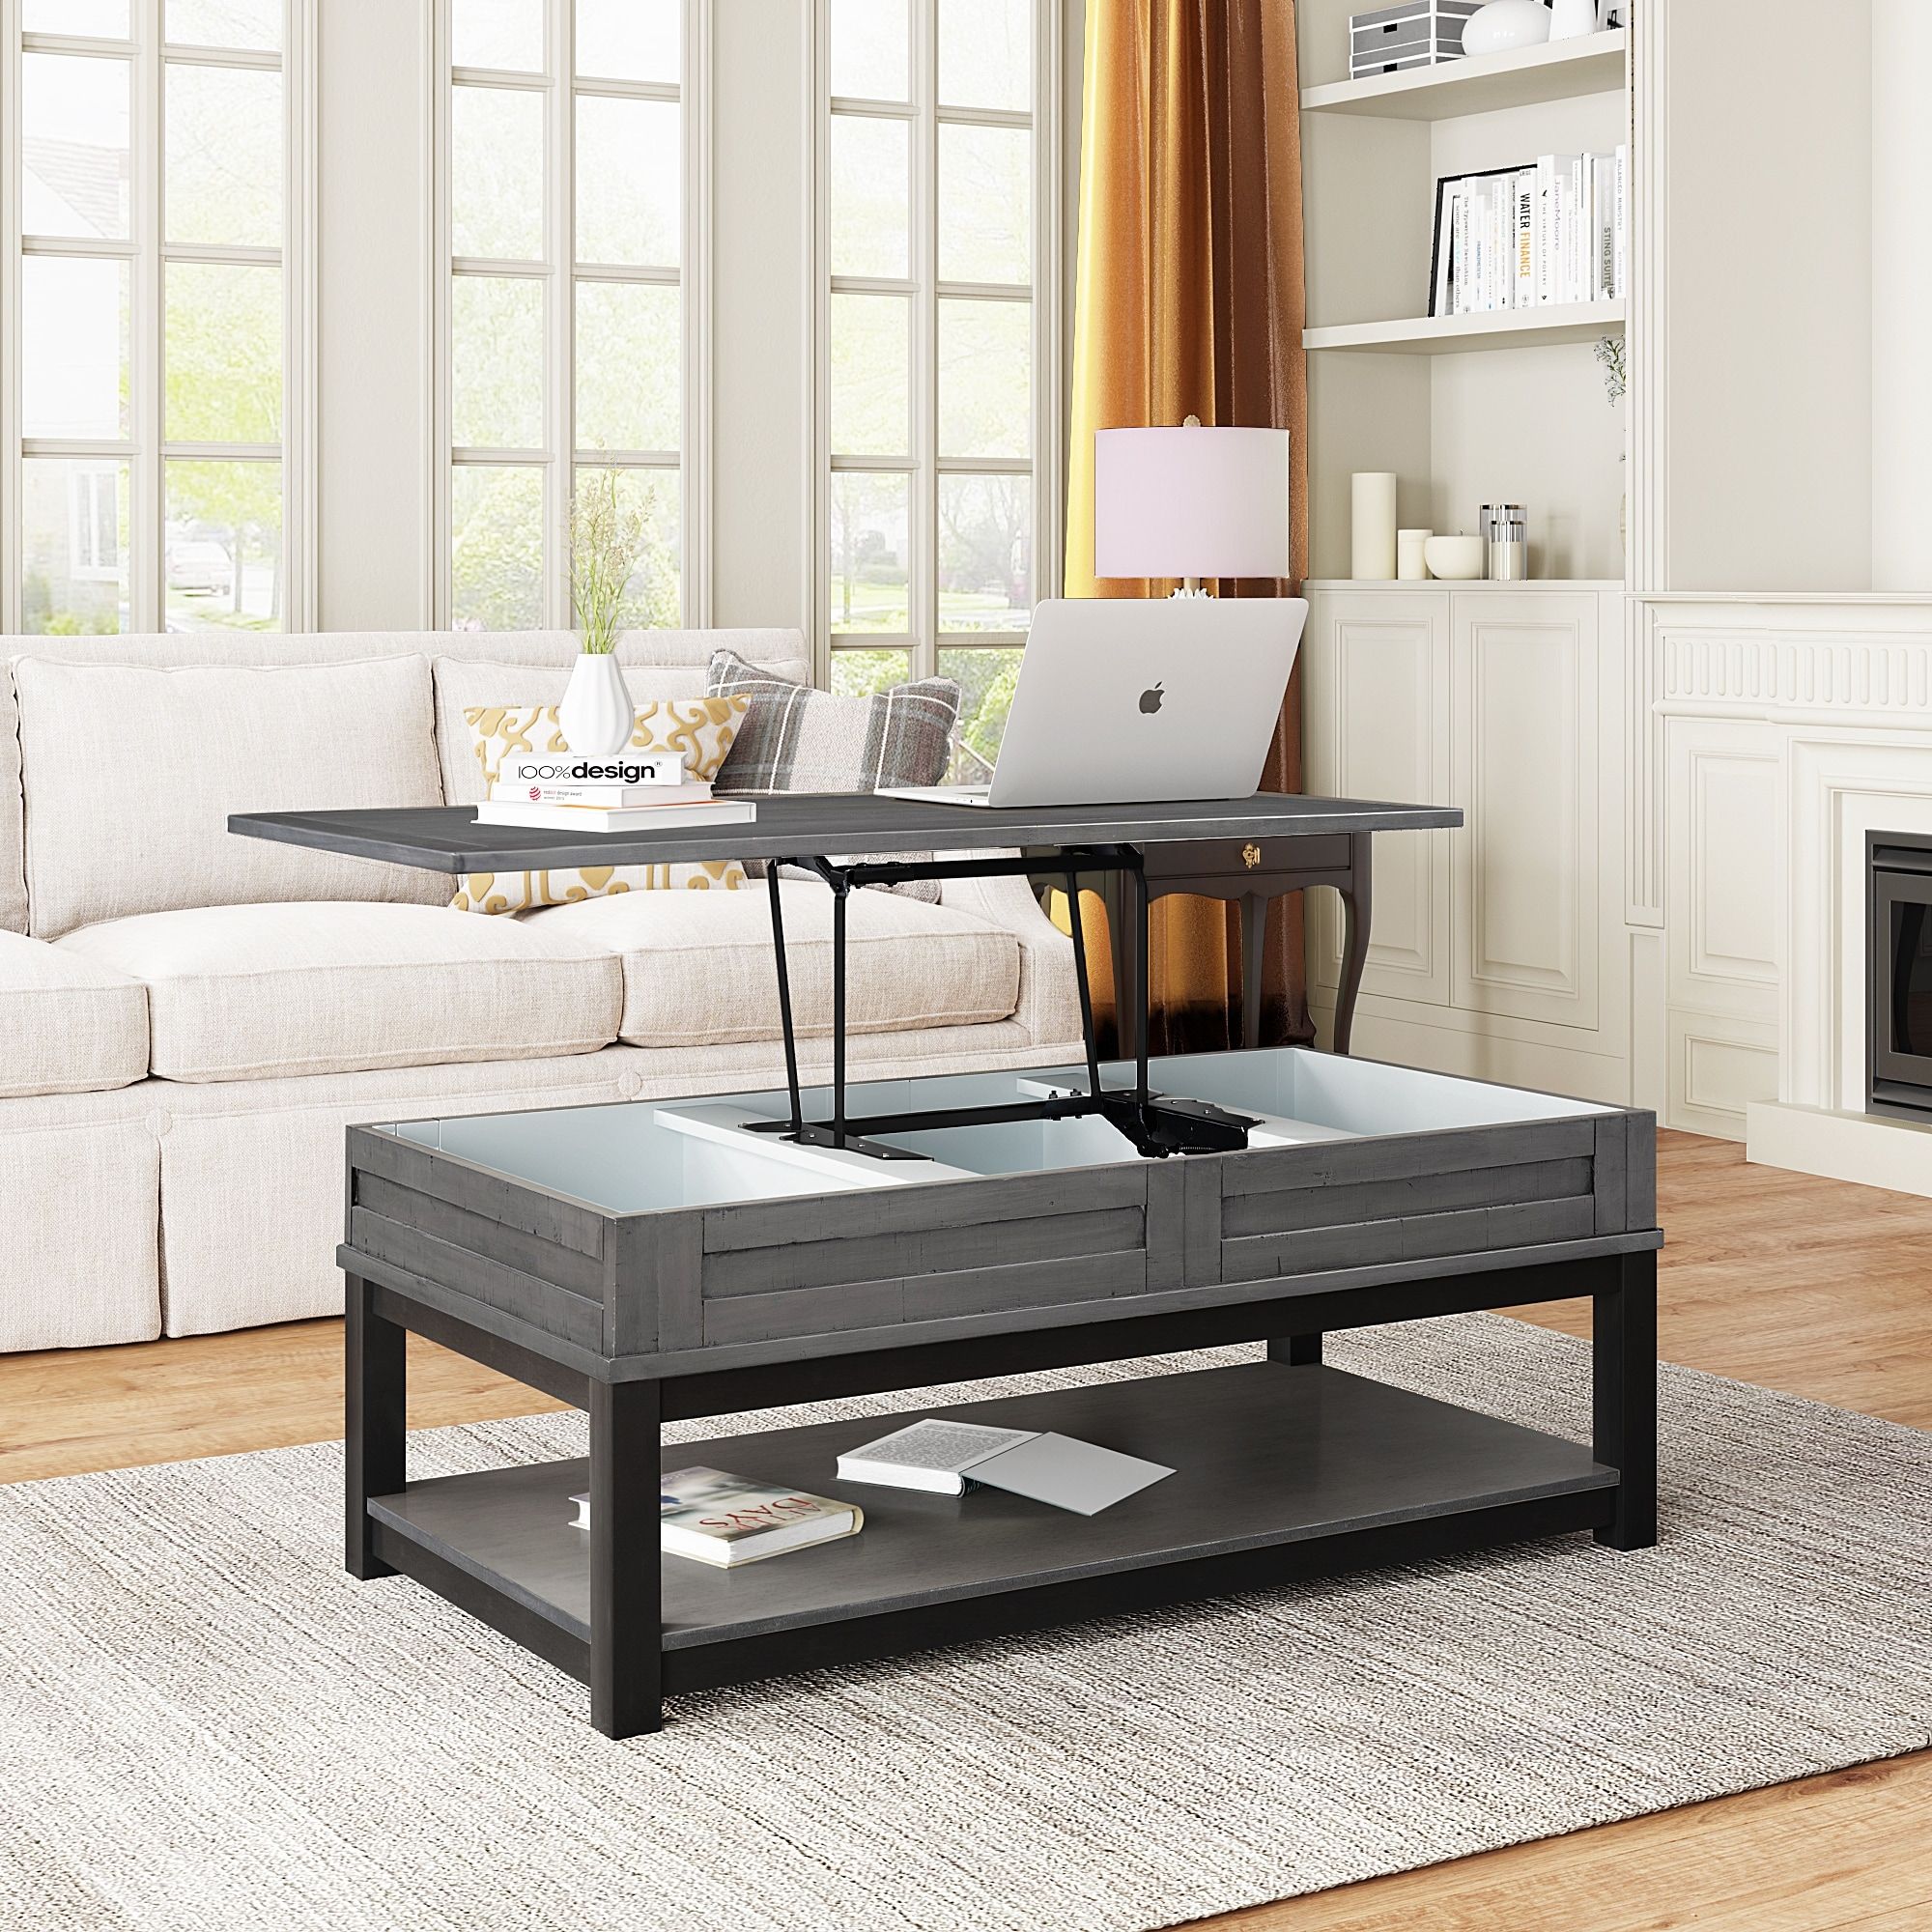 Lift Top Coffee Table With Inner Storage Space & Shelf, Modern Simple  Exquisite End Tables For Living Room, Bedroom – Bed Bath & Beyond – 37277080 In Lift Top Coffee Tables With Shelves (View 4 of 15)